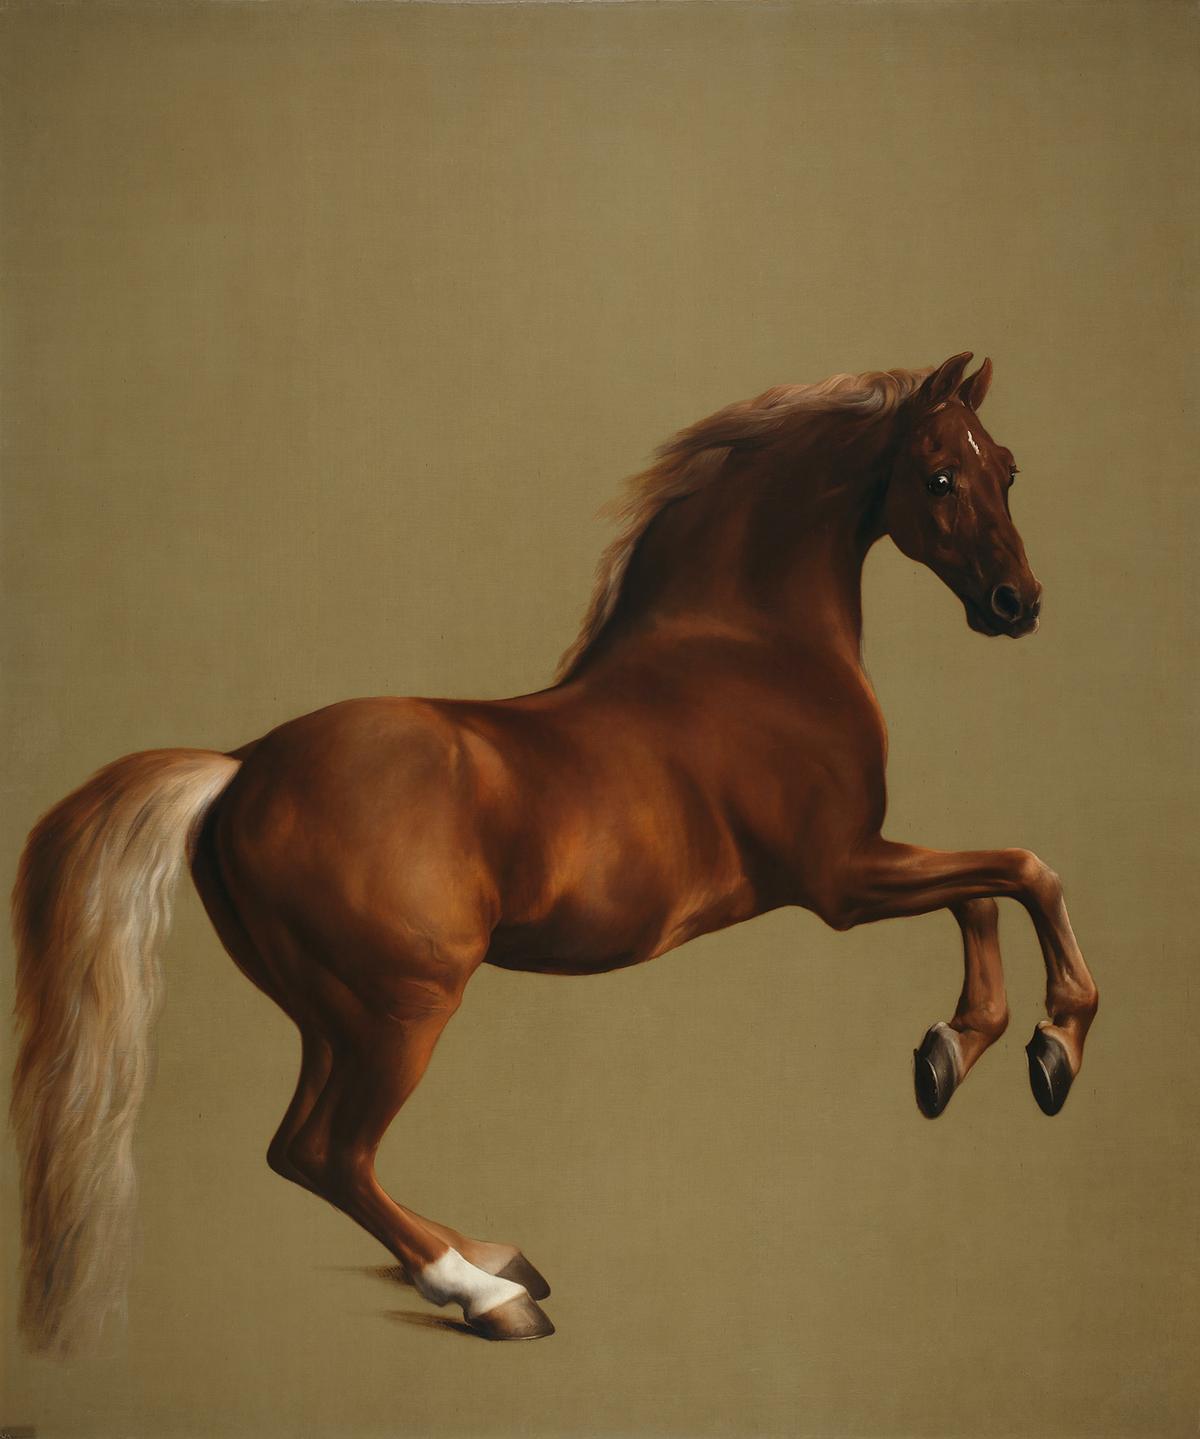  "Whistlejacket," circa 1762, by George Stubbs. Oil on canvas; 114.9 inches by 97 inches. National Gallery, London. (Public Domain)